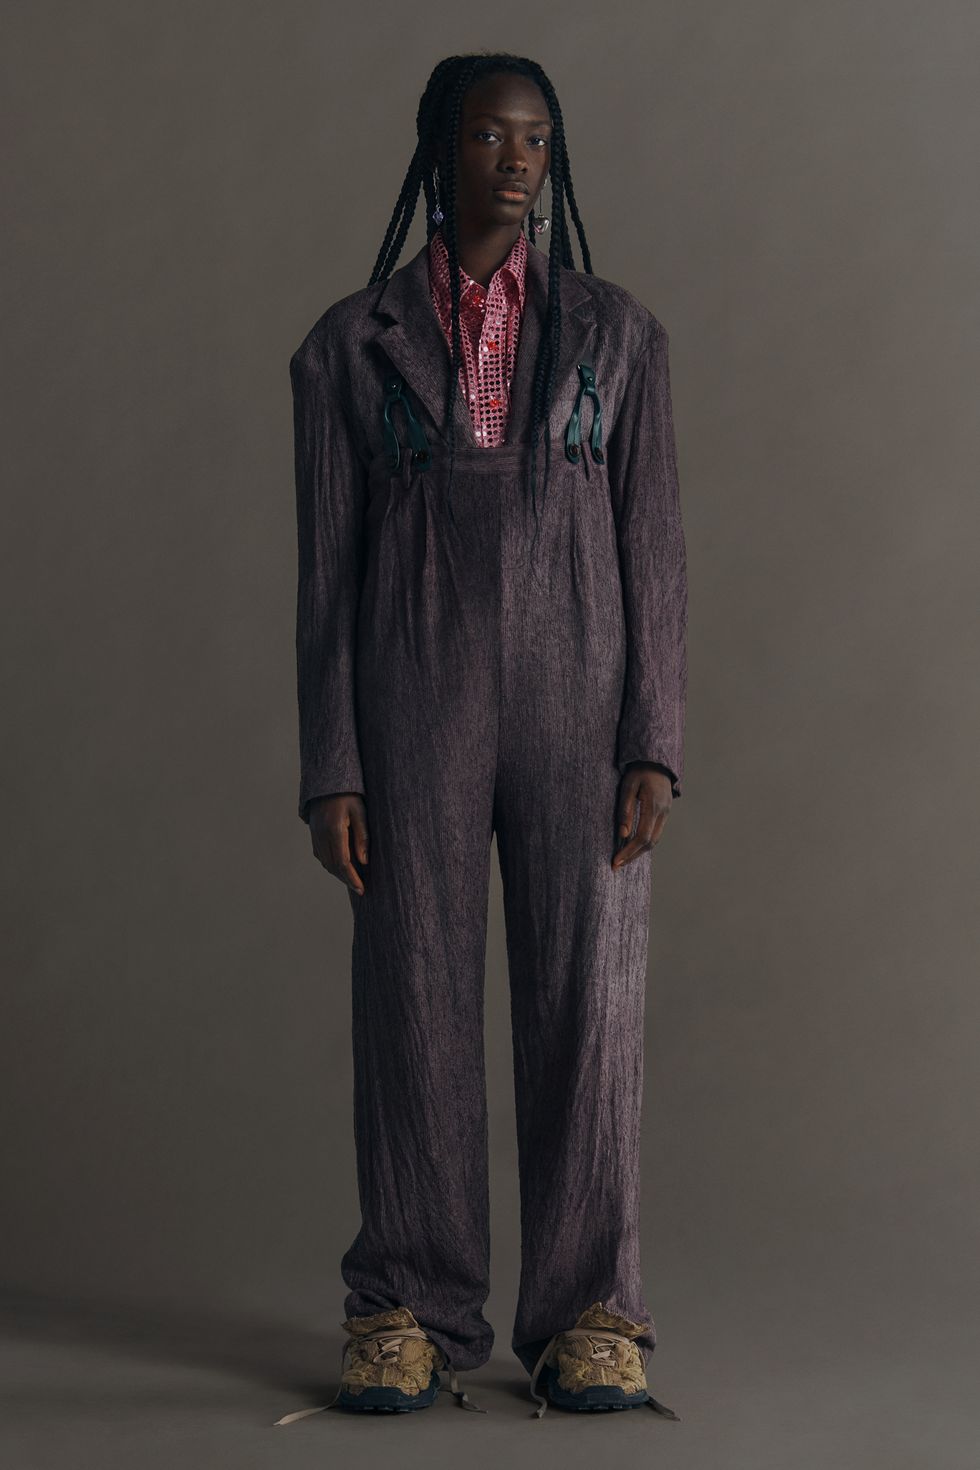 Acne Studios takes aim at nomadic style for new men's collection - 5